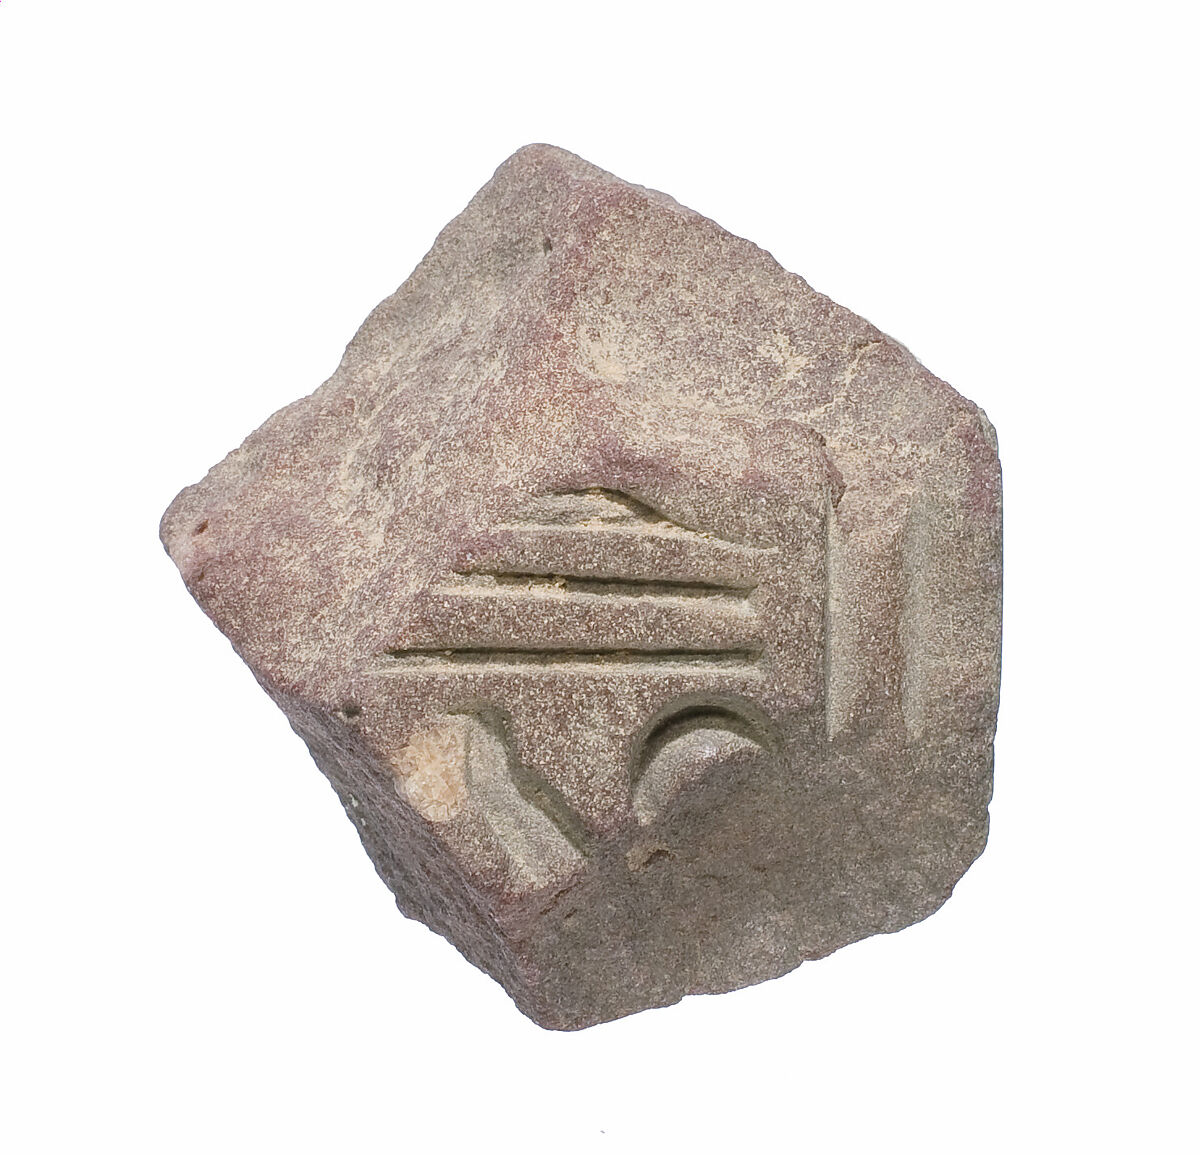 Part of a small block with parts of names of the Aten and Akhenaten preserved on two adjacent sides, Red quartzite 